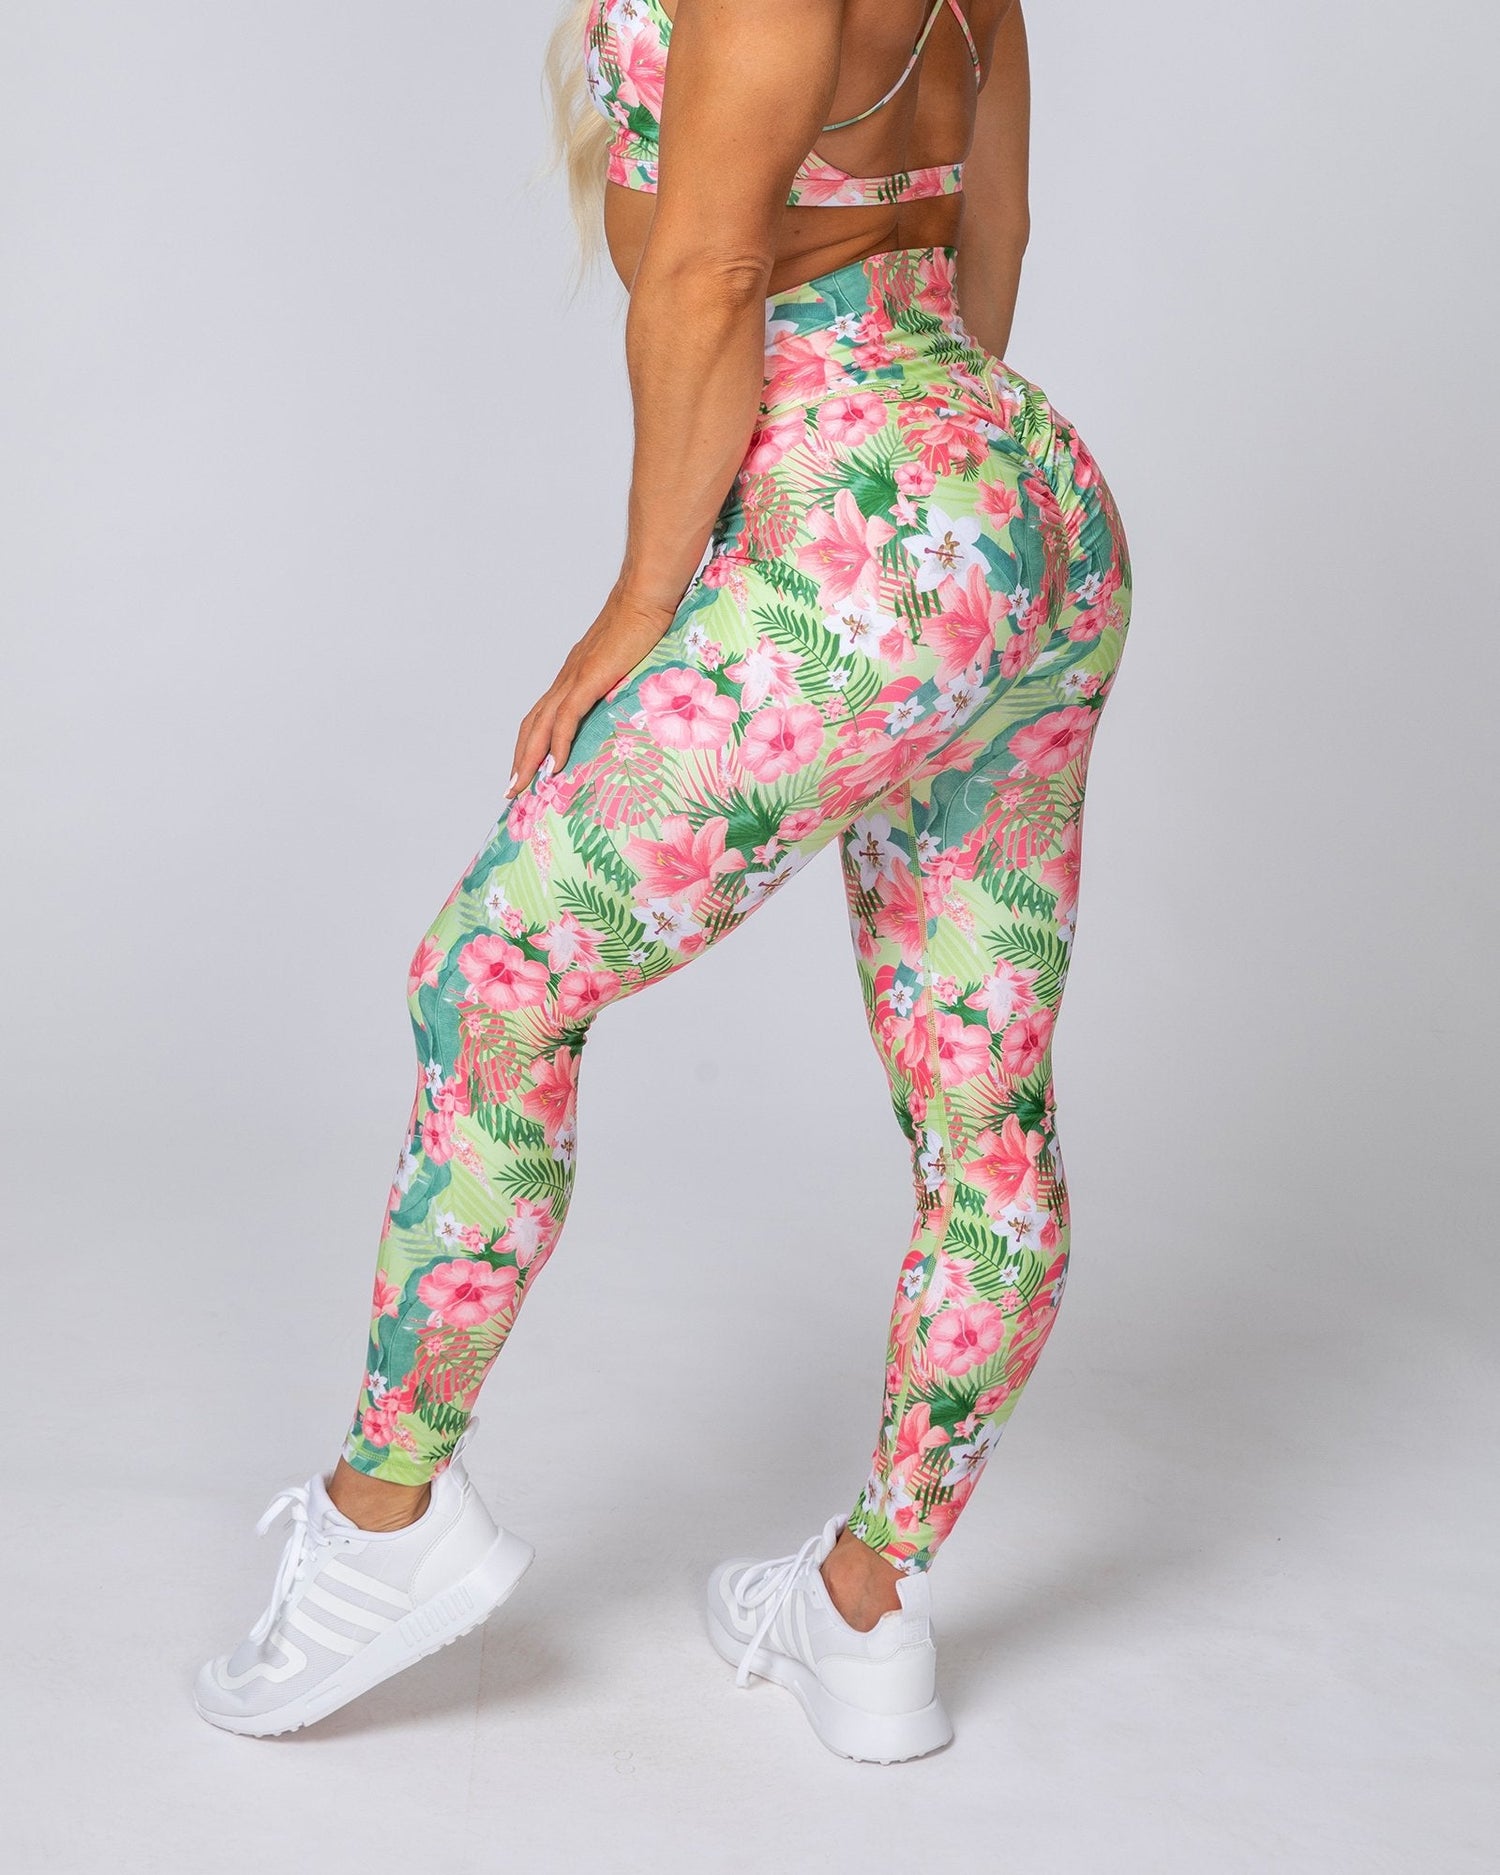 HBxMN Sweetheart Ankle Length Leggings - Tropical Floral - Muscle